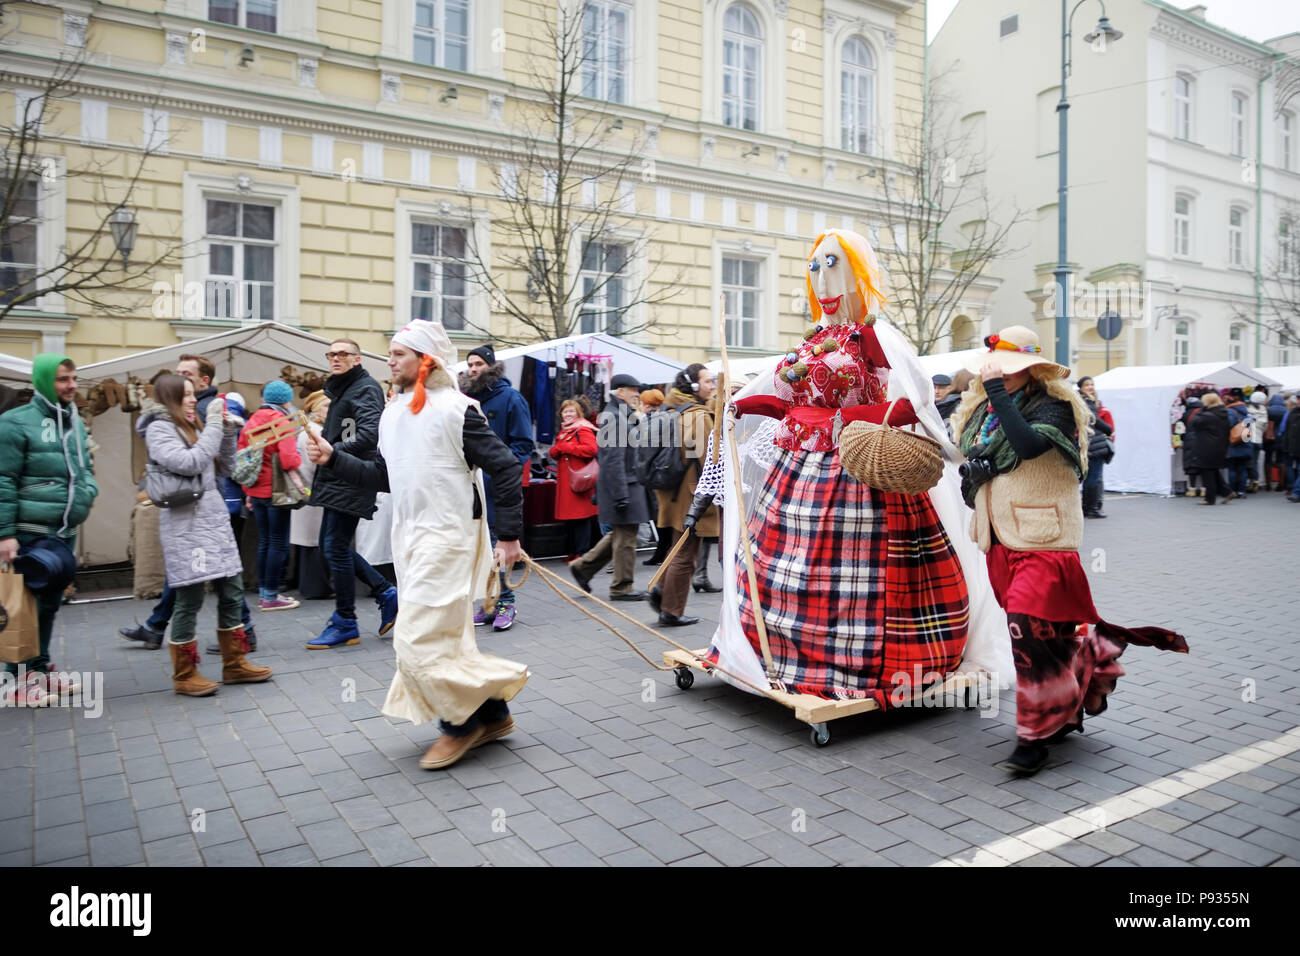 VILNIUS, LITHUANIA - FEBRUARY 25, 2017: Hundreds of people celebrating Uzgavenes, a Lithuanian annual folk festival taking place before Easter. Partic Stock Photo